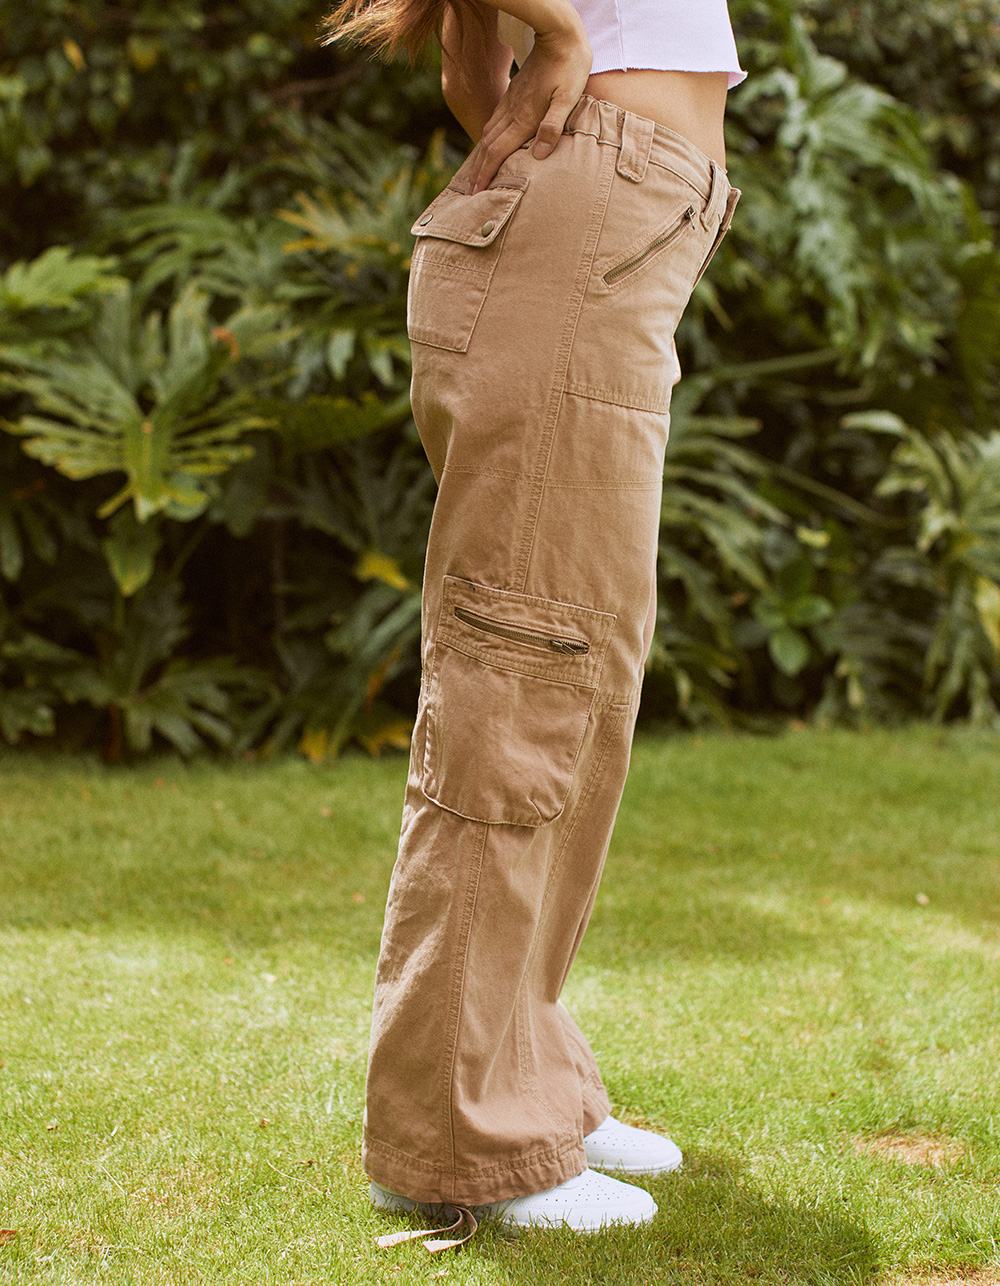 RSQ Womens Low Rise Overdye Cargo Zipper Pants - FADED BROWN